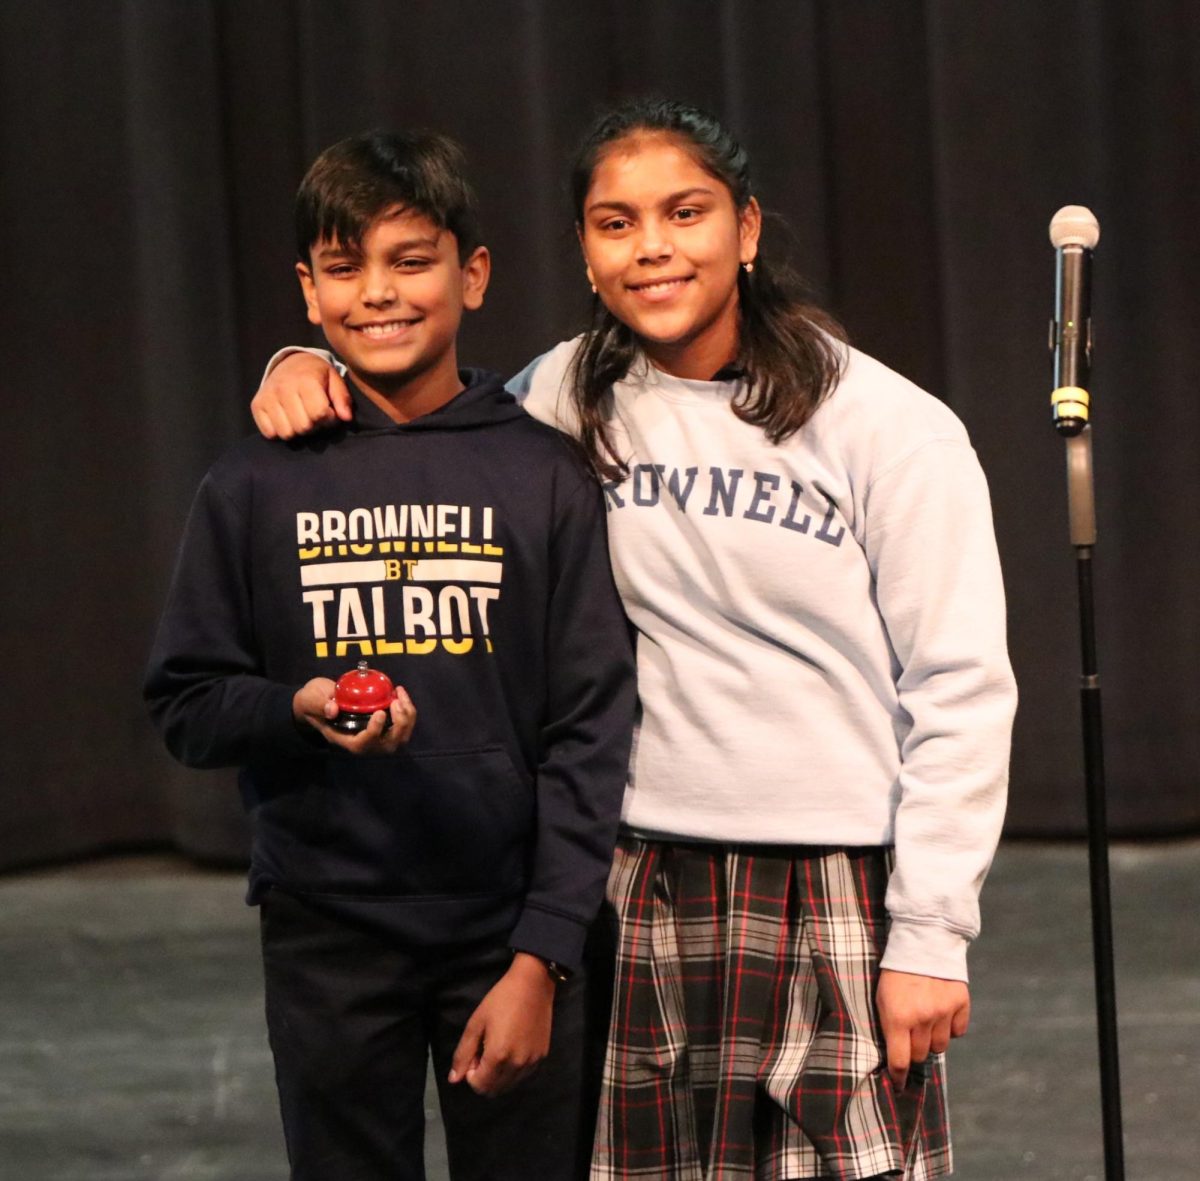 Siblings Nishan Jacob (6th grade) and Anoushka Jabob (8th grade) competed for first place, with Nishan coming out on top.